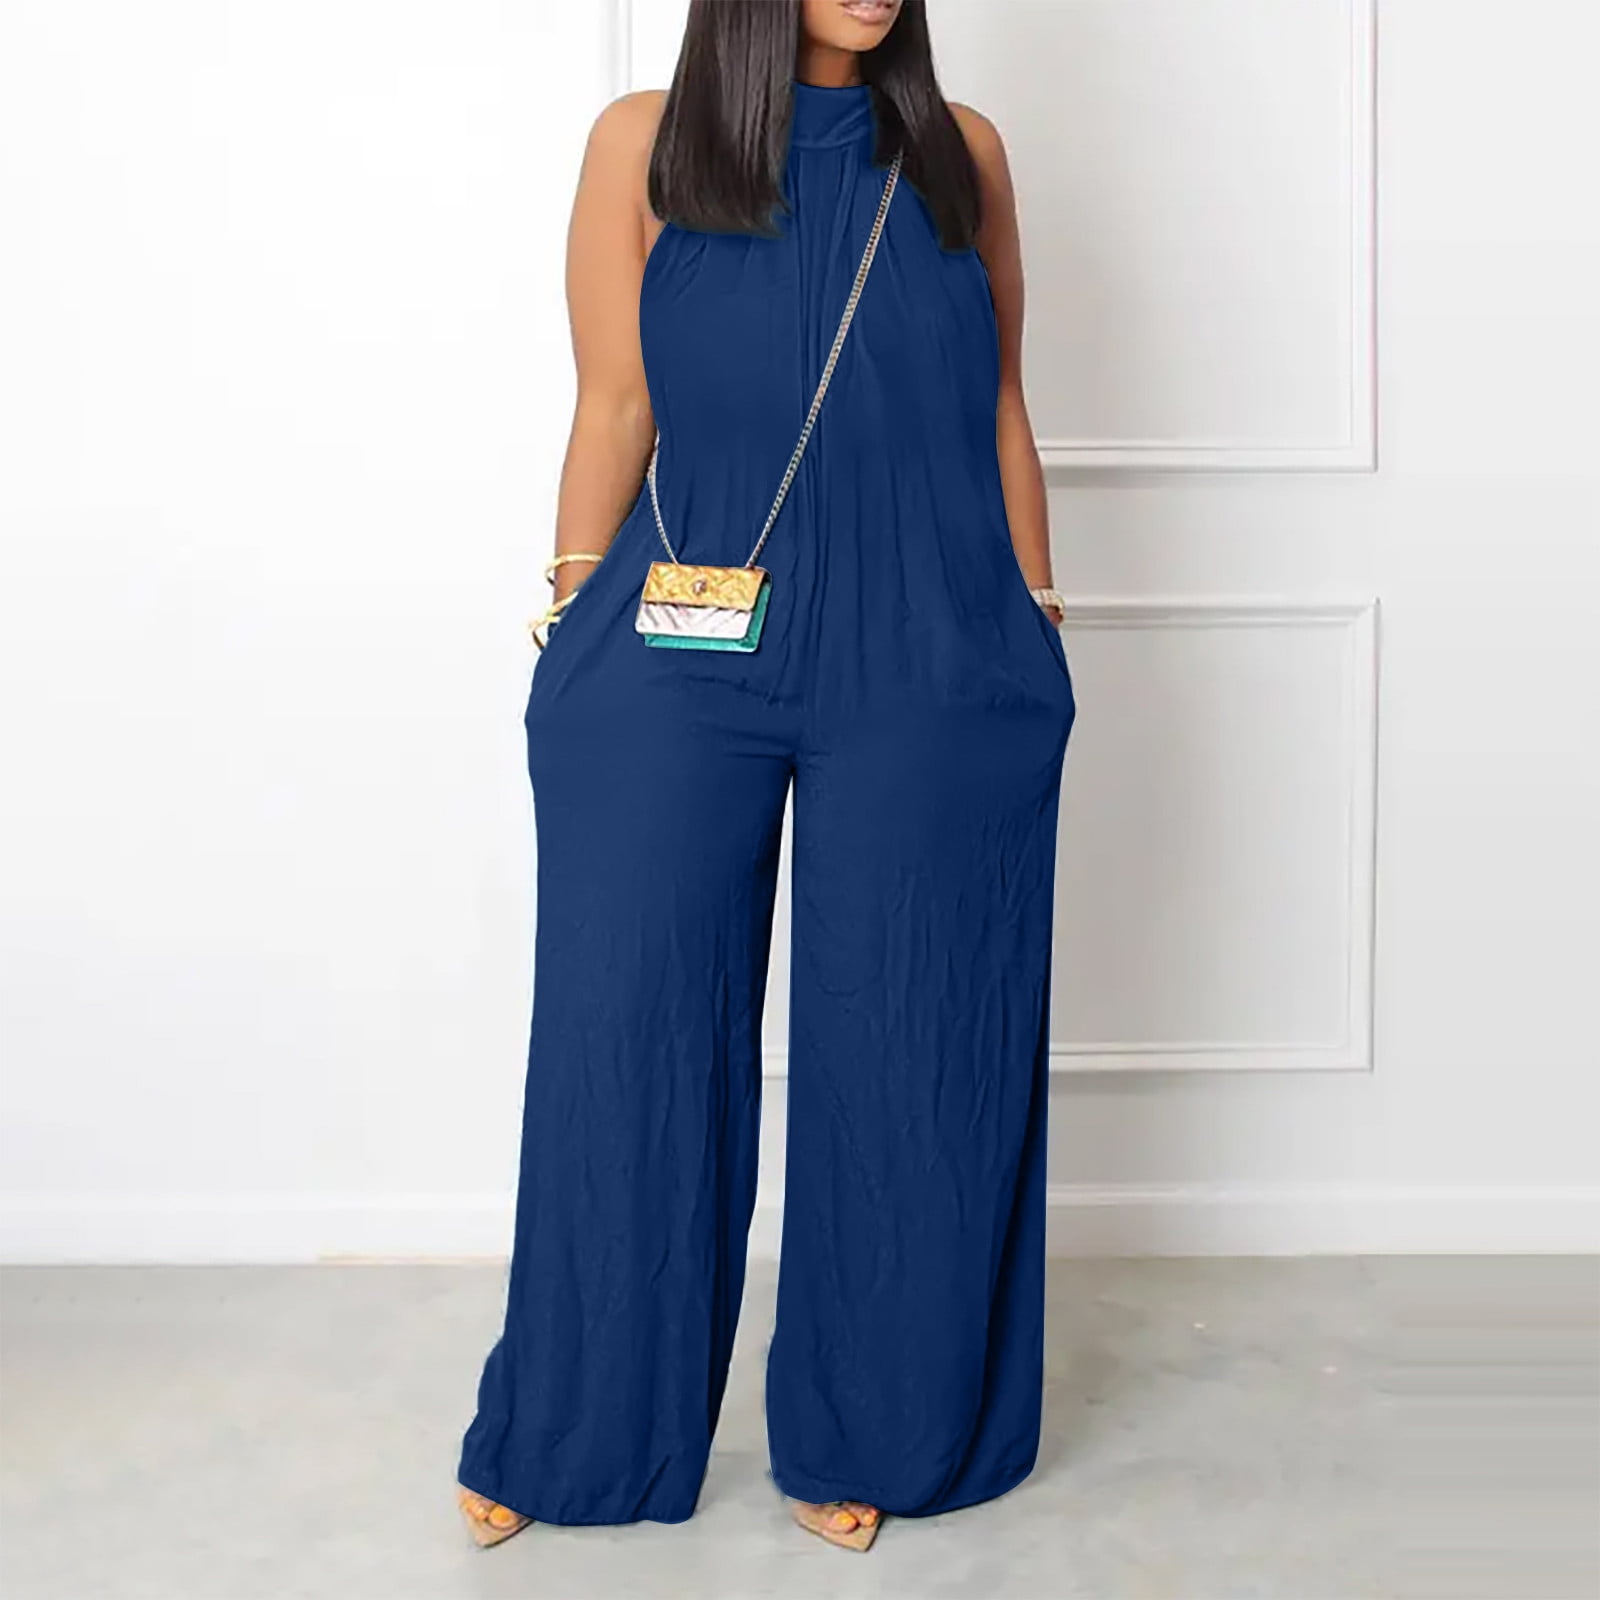 Women's Plus Size Jumpsuit Summer Beach Sleeveless Solid Color Casual ...